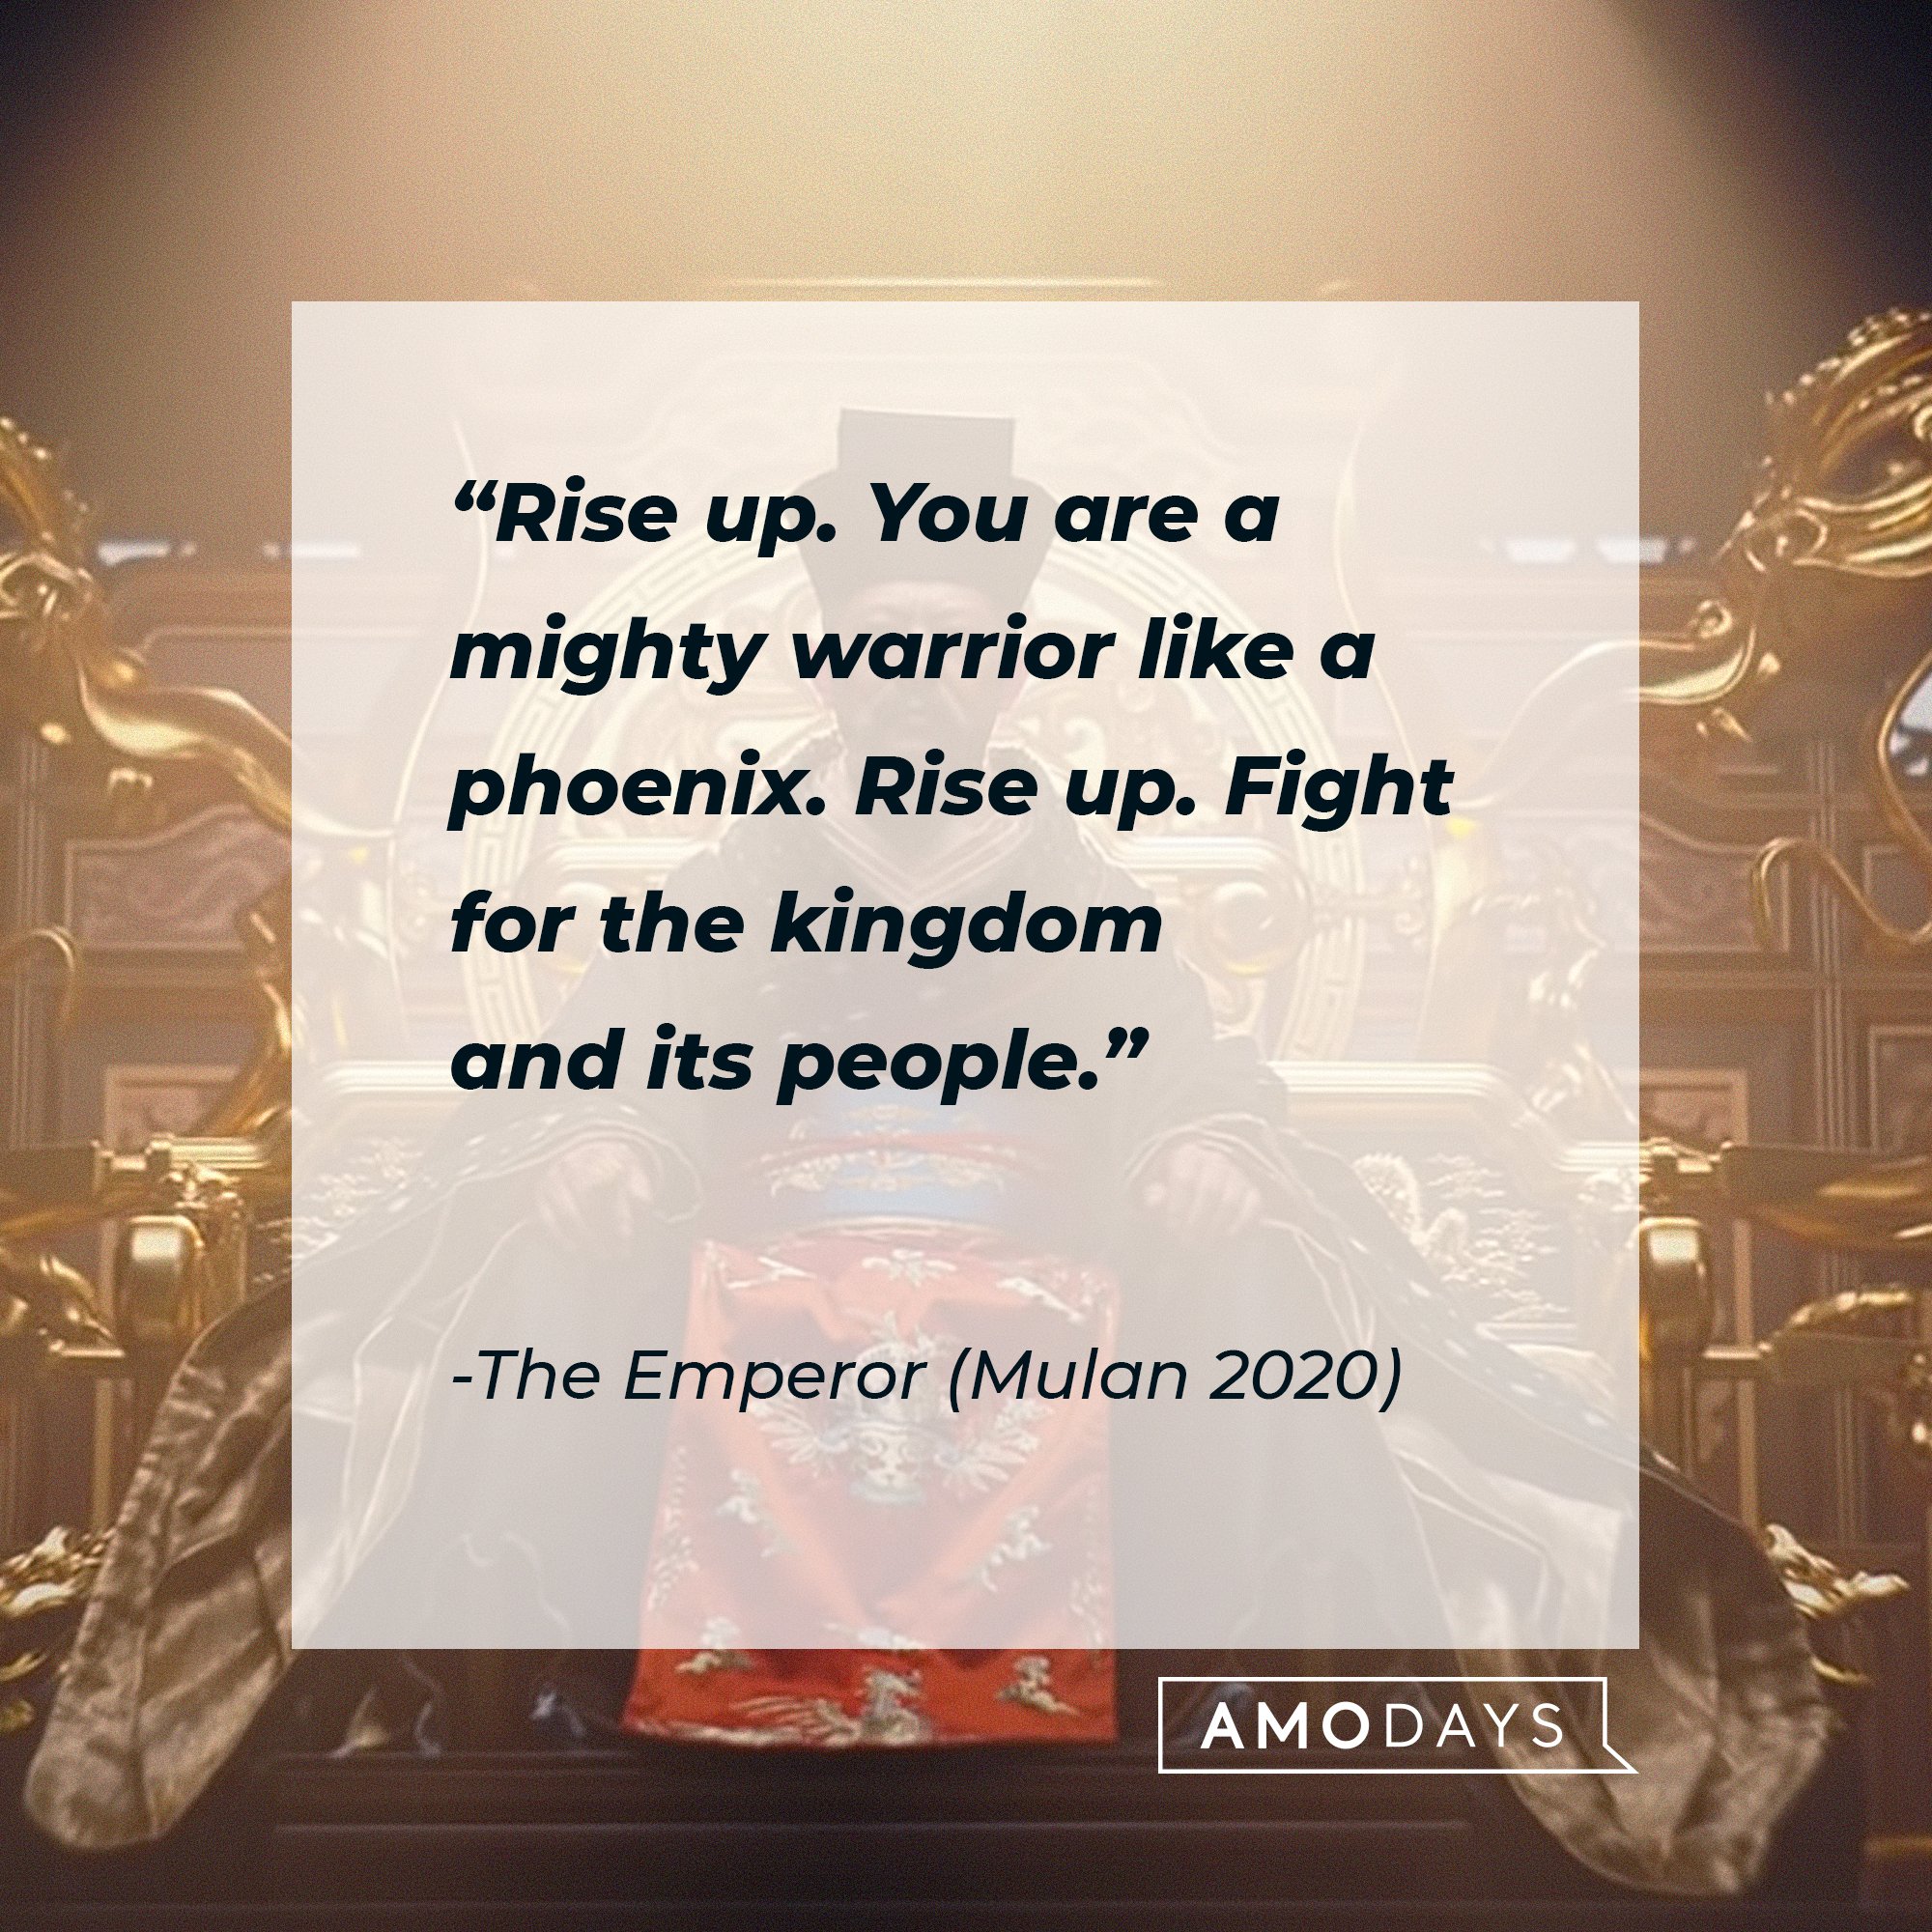 The Emperor’s quote: “Rise up. You are a mighty warrior like a phoenix. Rise up. Fight for the kingdom and its people.” | Image: AmoDays